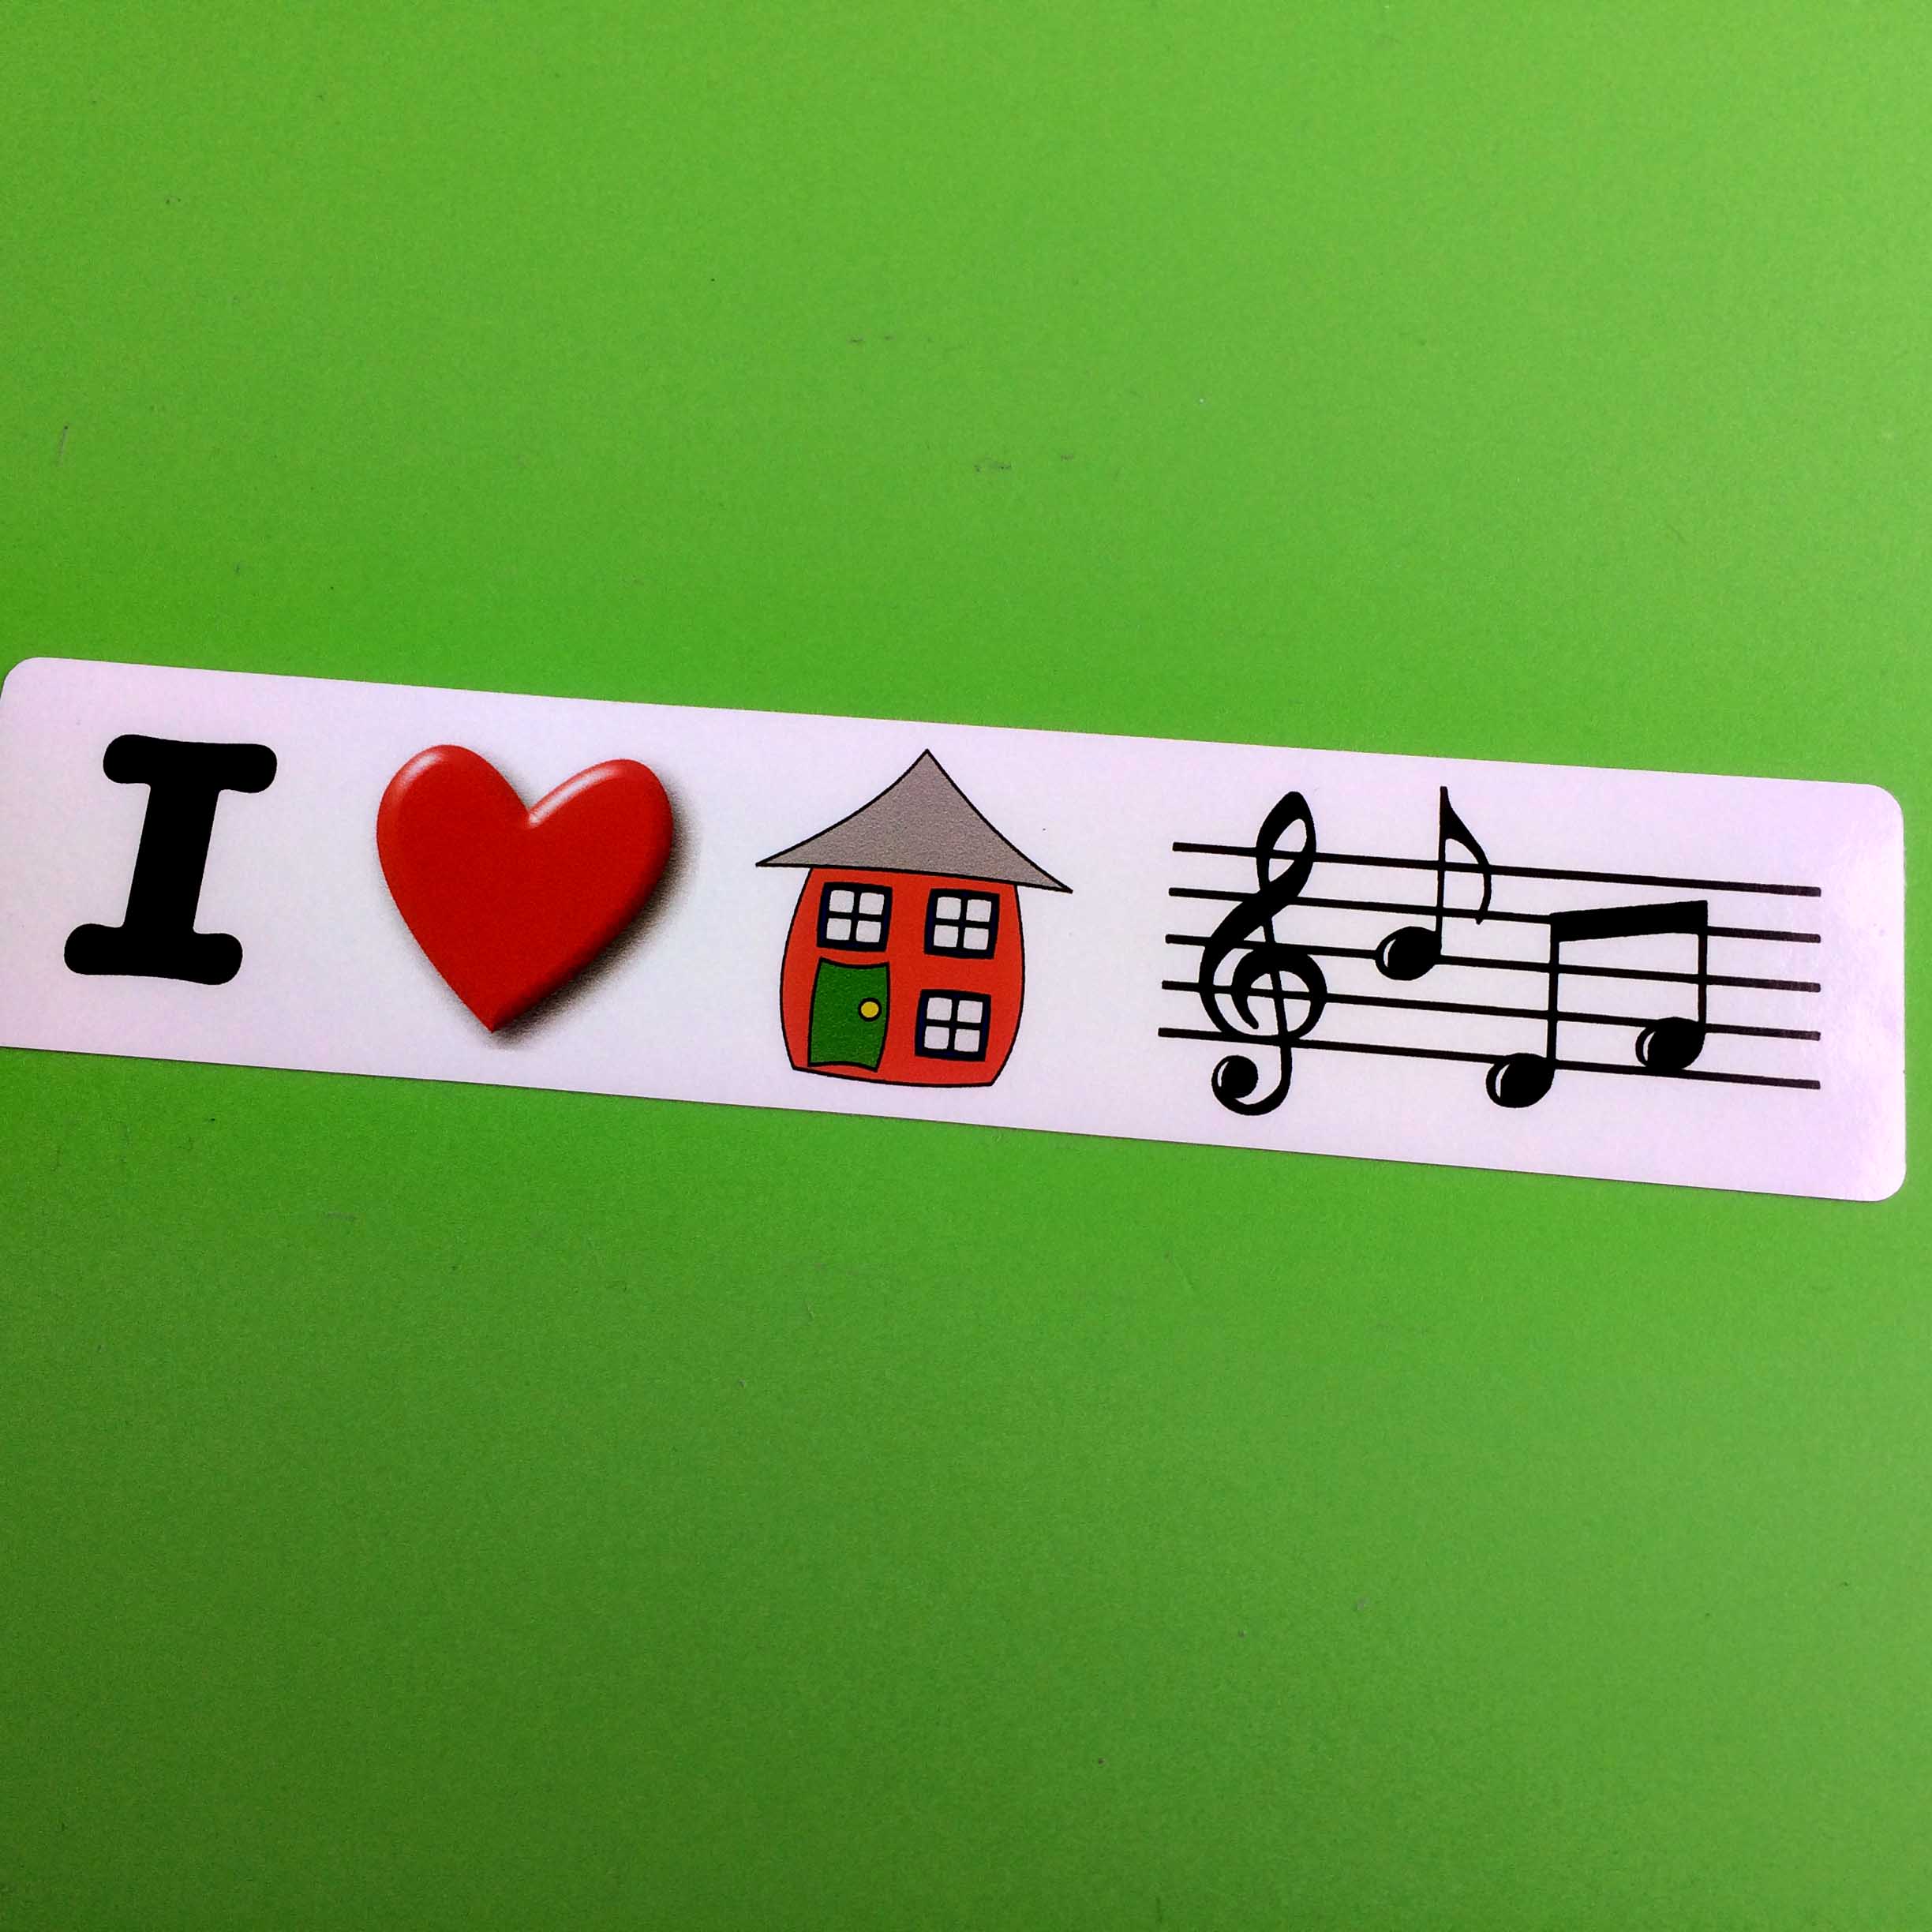 The letter I in black, a red love heart, a red house with a green door and three windows and musical notes sit in a row on a white background.